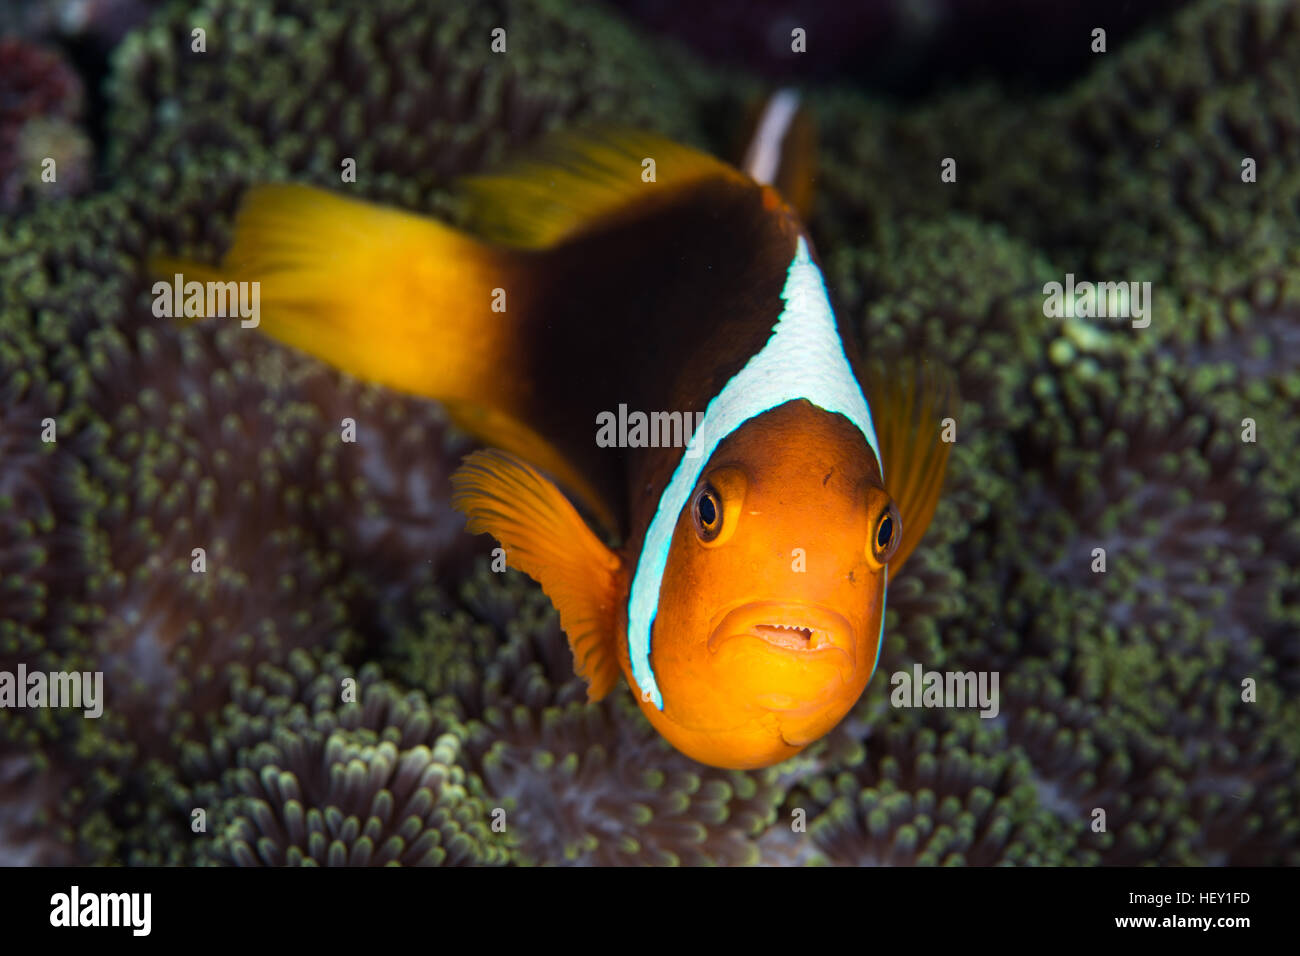 A White Bonnet anemonefish (Amphiprion leucokranos) swims close to the tentacles of its host anemone in the Solomon Islands. Stock Photo